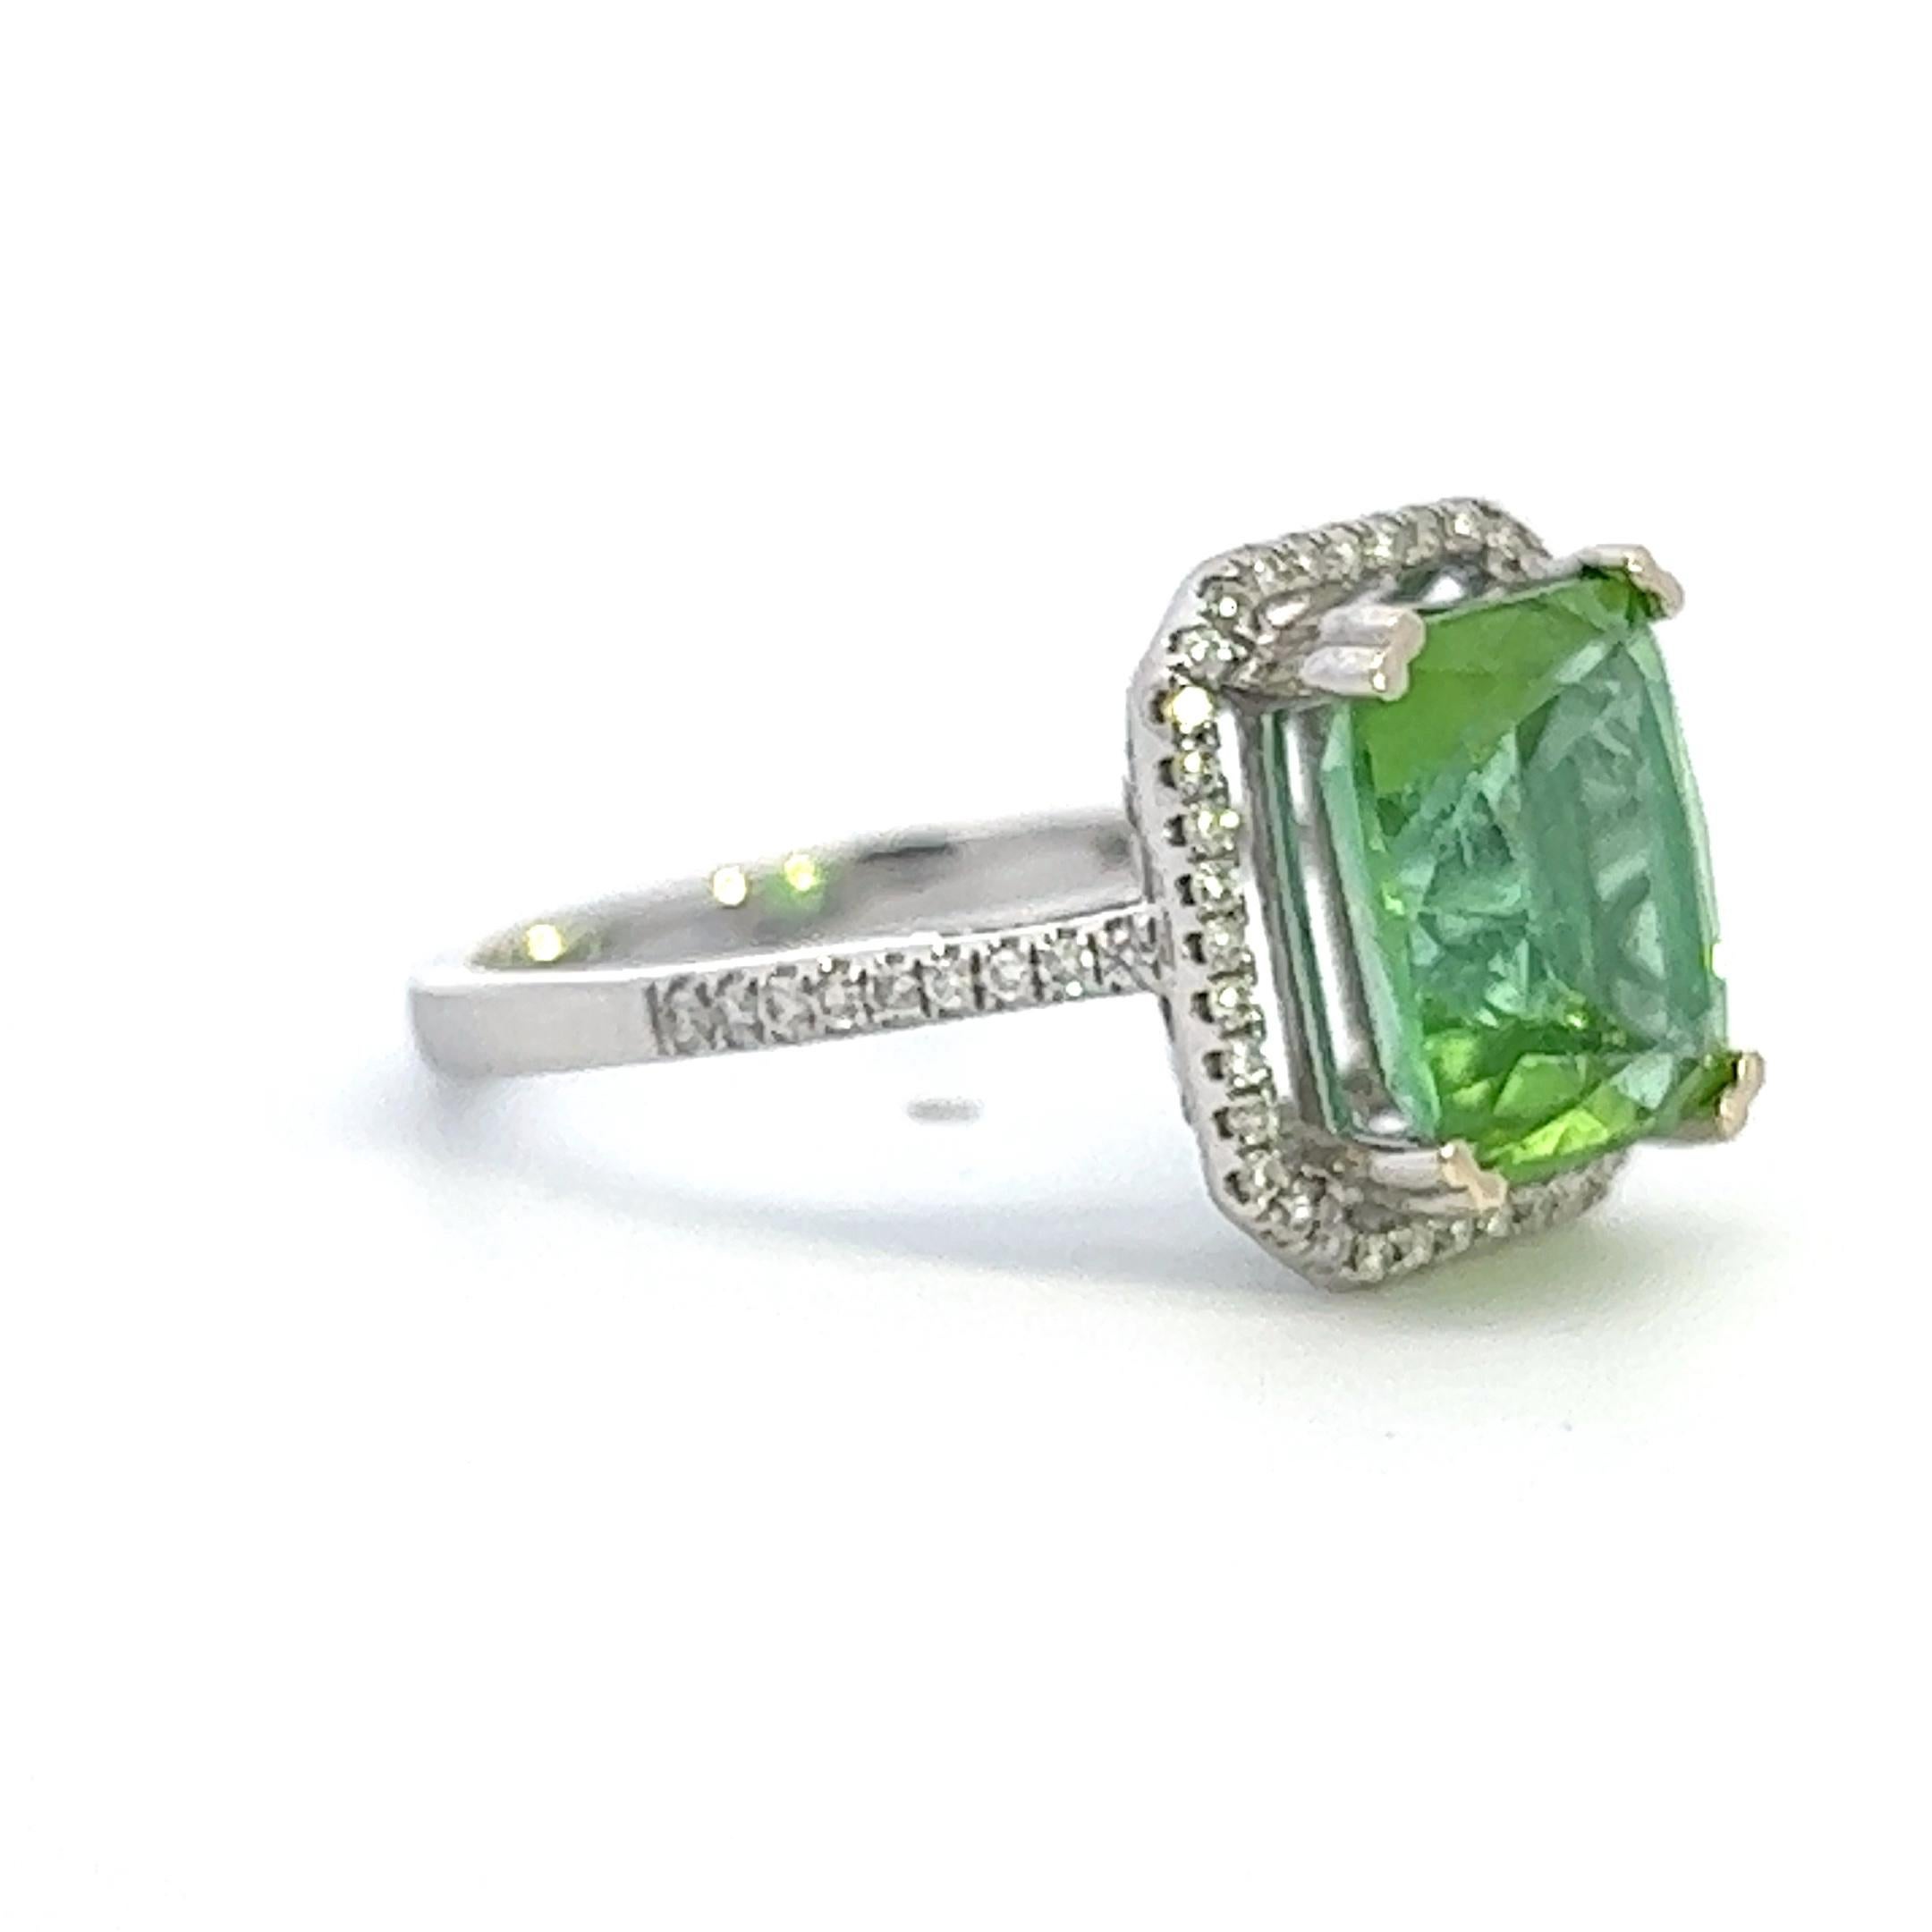 An incredible blue green tourmaline set within a halo of diamonds in a 14k white gold ring. The green tourmaline has a remarkable blue hue and weighs approximately 4 carats (measured in setting). The ring is a size 6.5 but can easily be resized. 